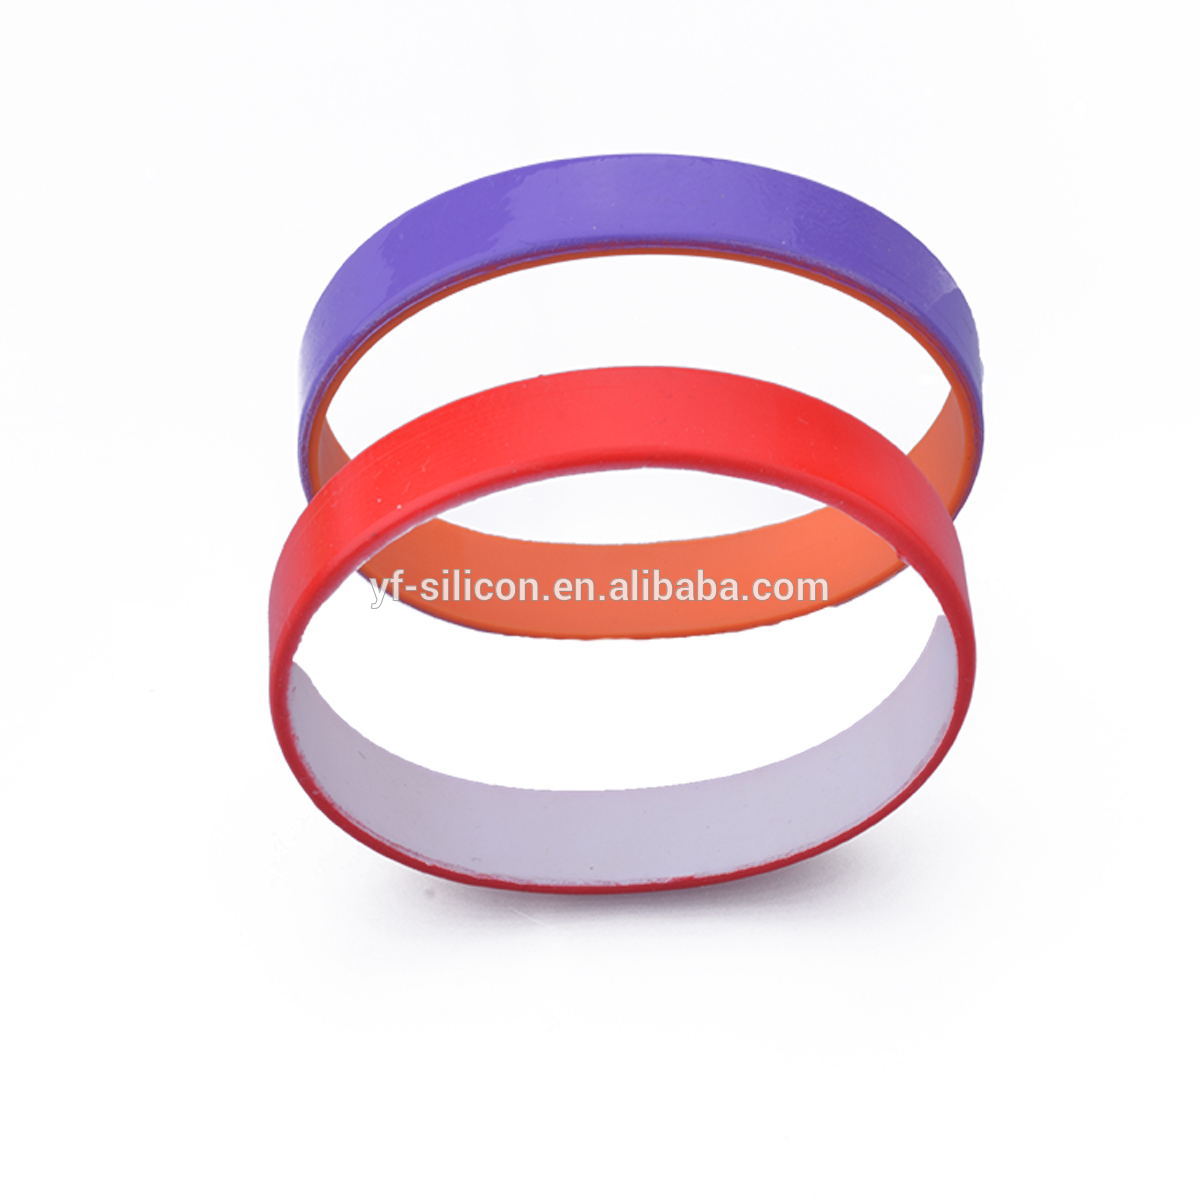 high quality silicone wristbands for kids SP-627 Details 17